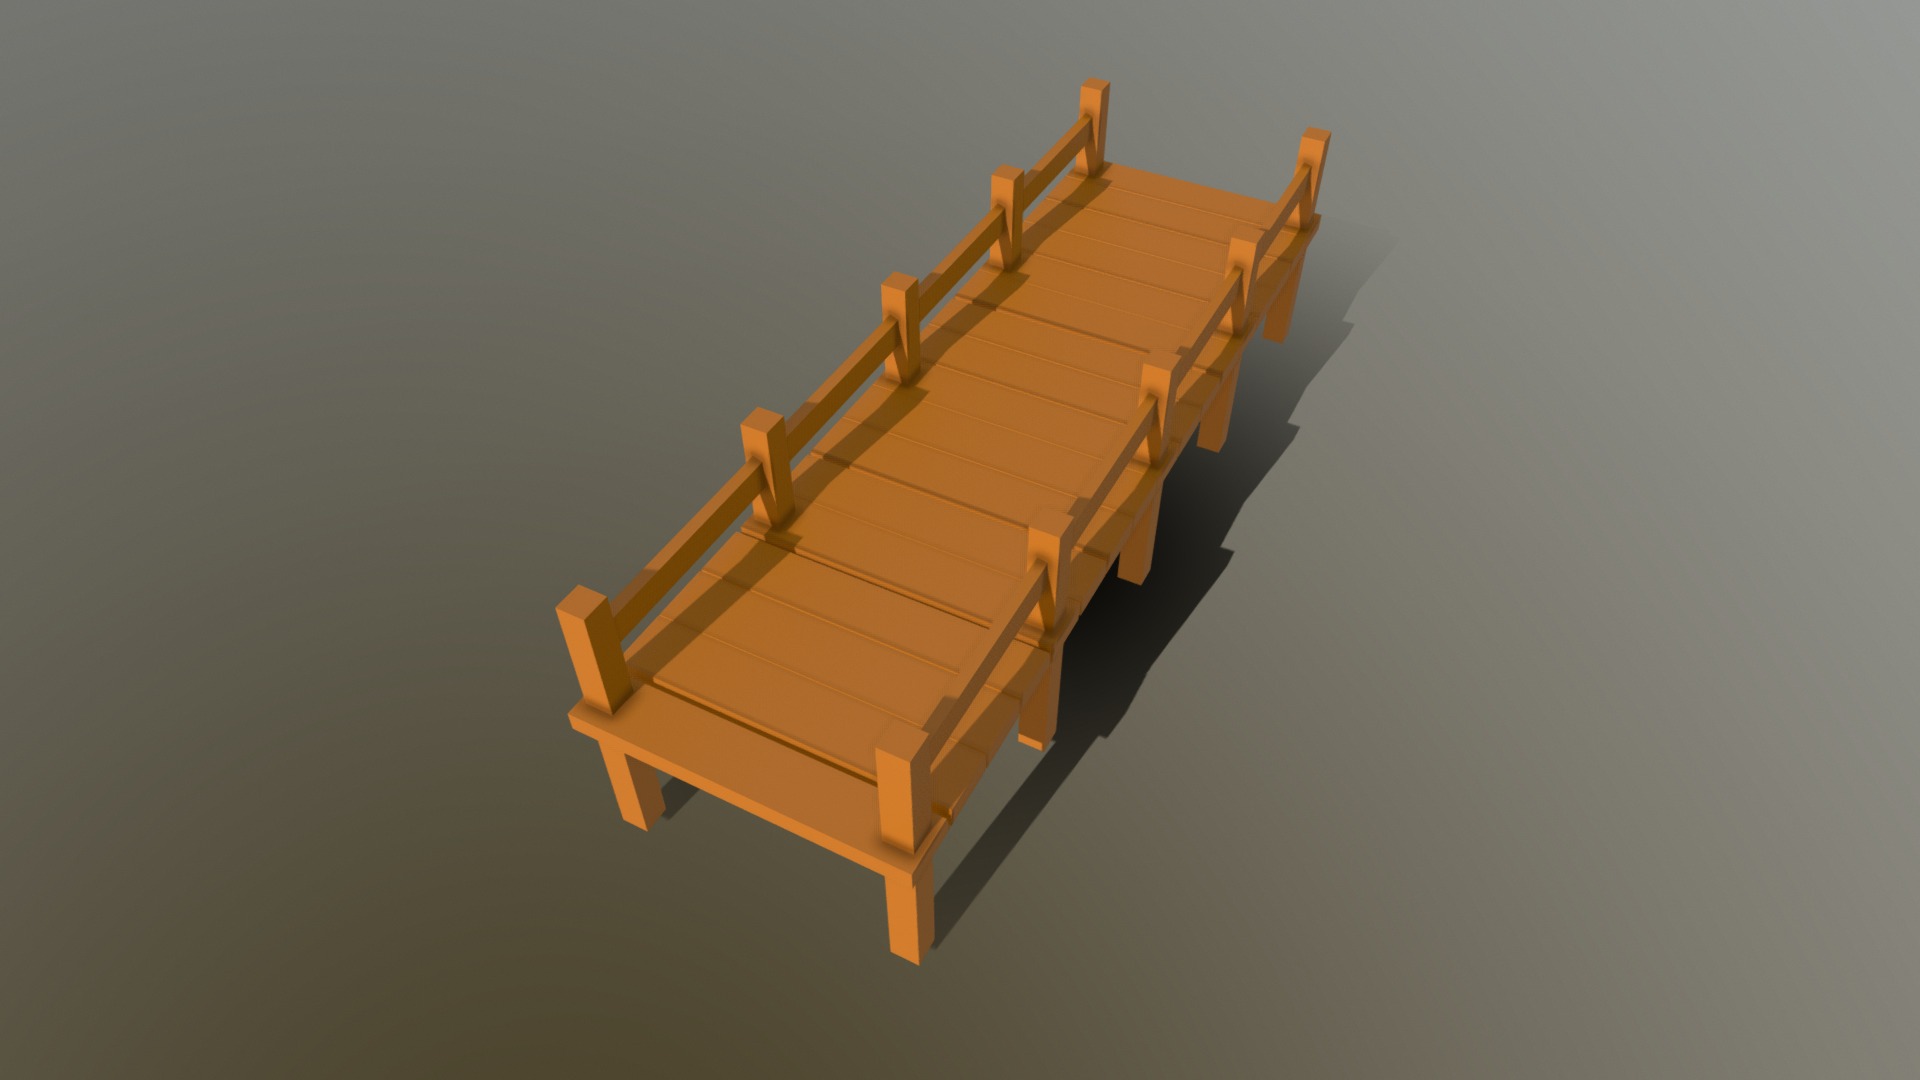 3D model HIE Bridge N2 - This is a 3D model of the HIE Bridge N2. The 3D model is about a wooden structure with a staircase.